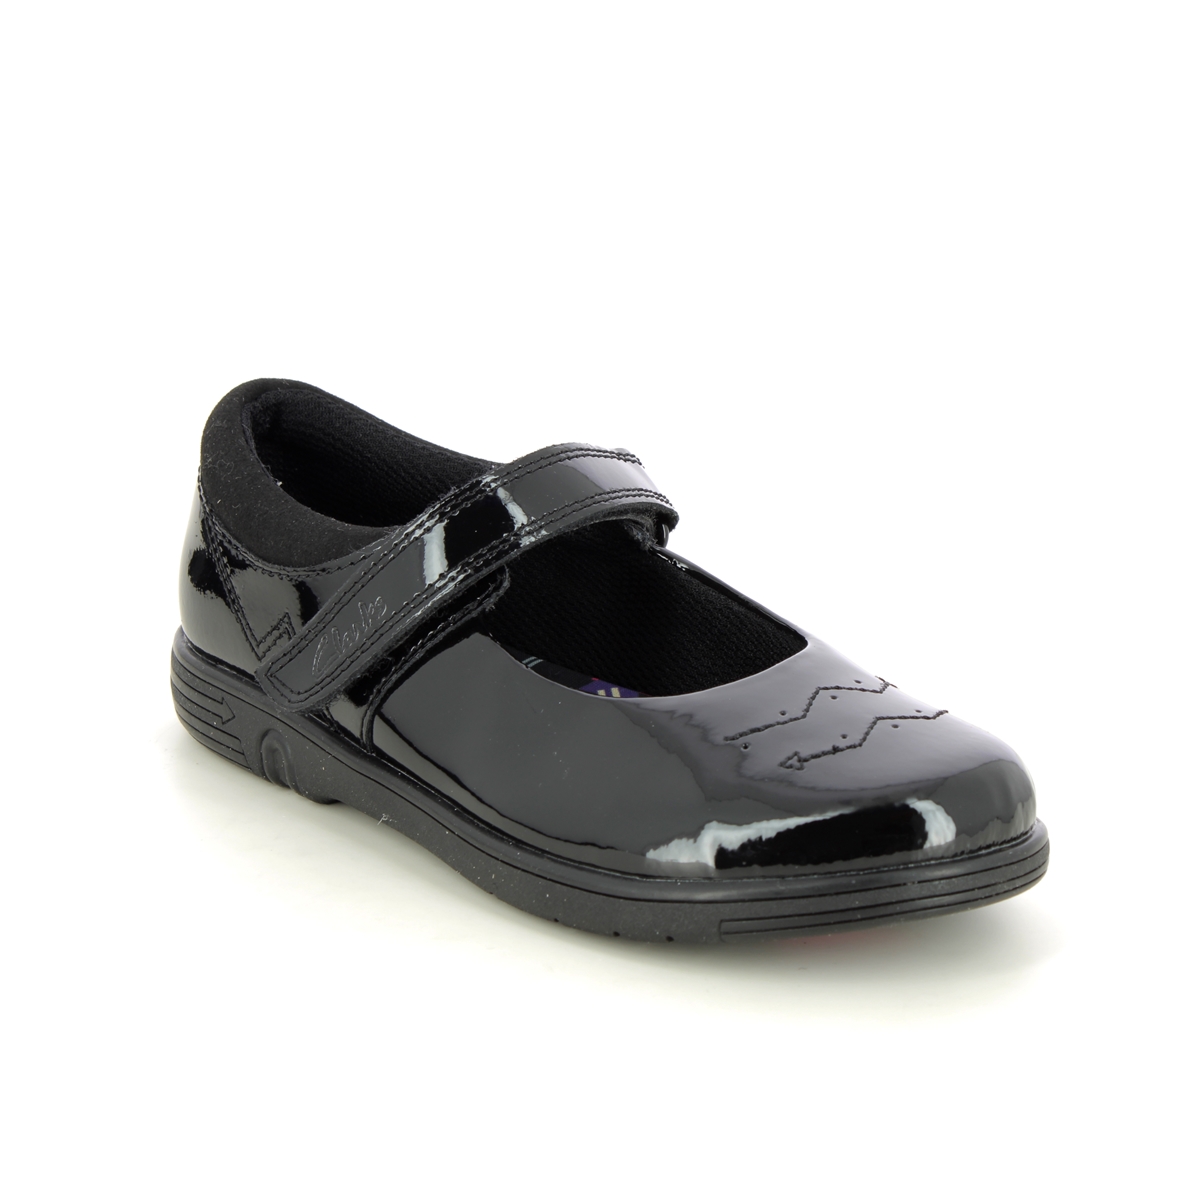 Clarks Jazzy Jig K Mary Jane Black Patent Kids Girls School Shoes 753086F In Size 12 In Plain Black Patent F Width Fitting Regular Fit For School For